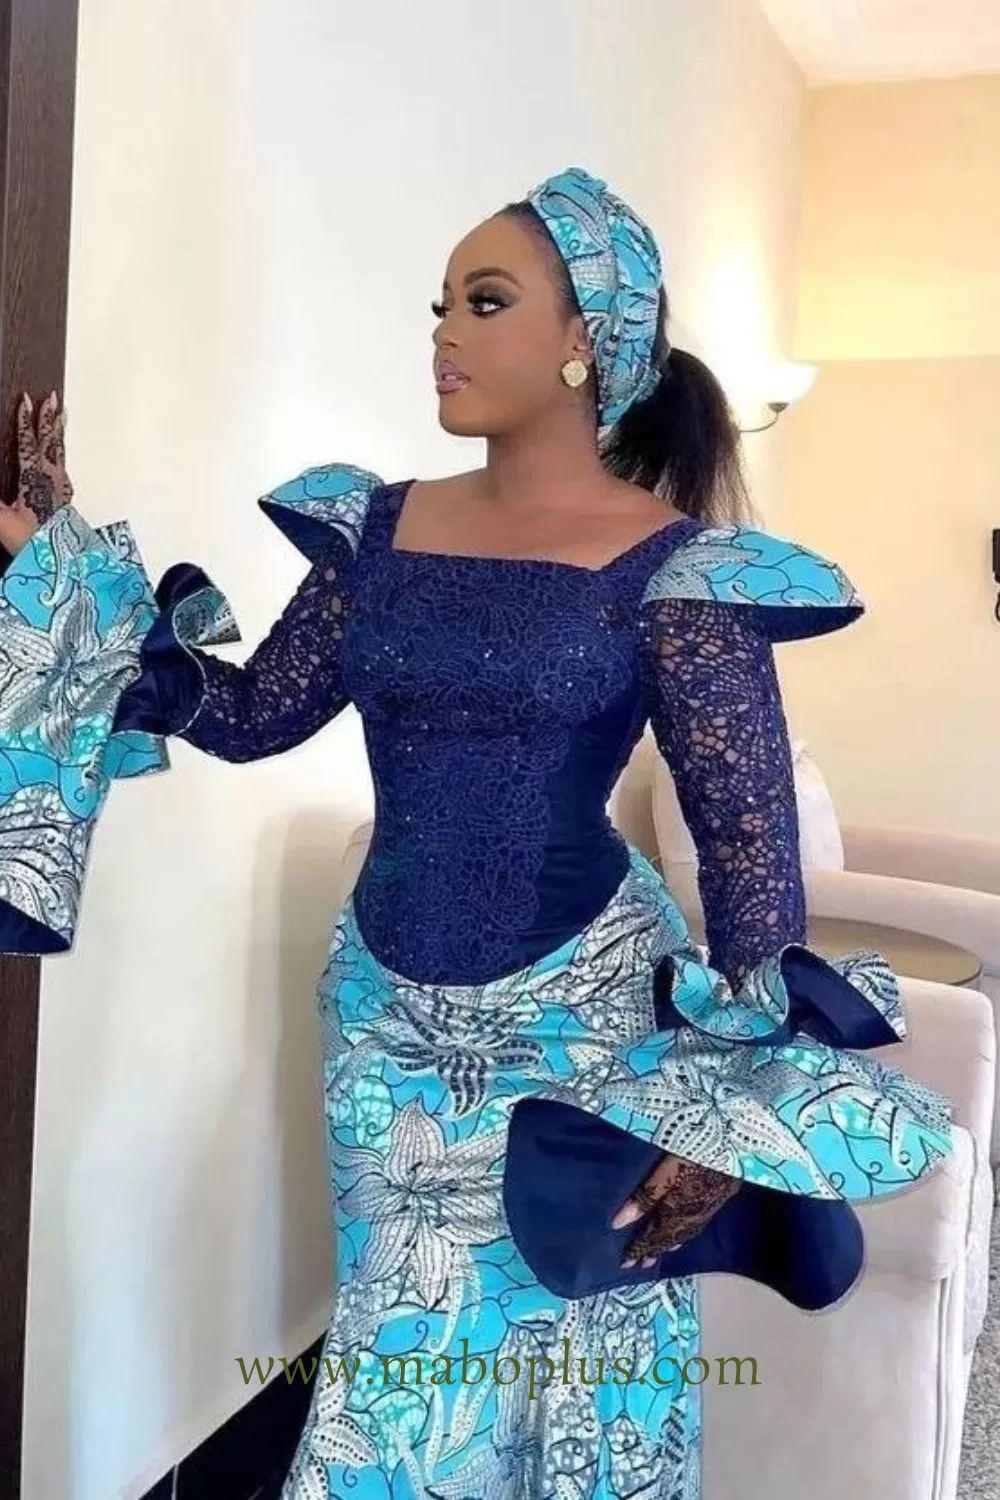 Look stunning to your next owambe in these 5 lace styles 